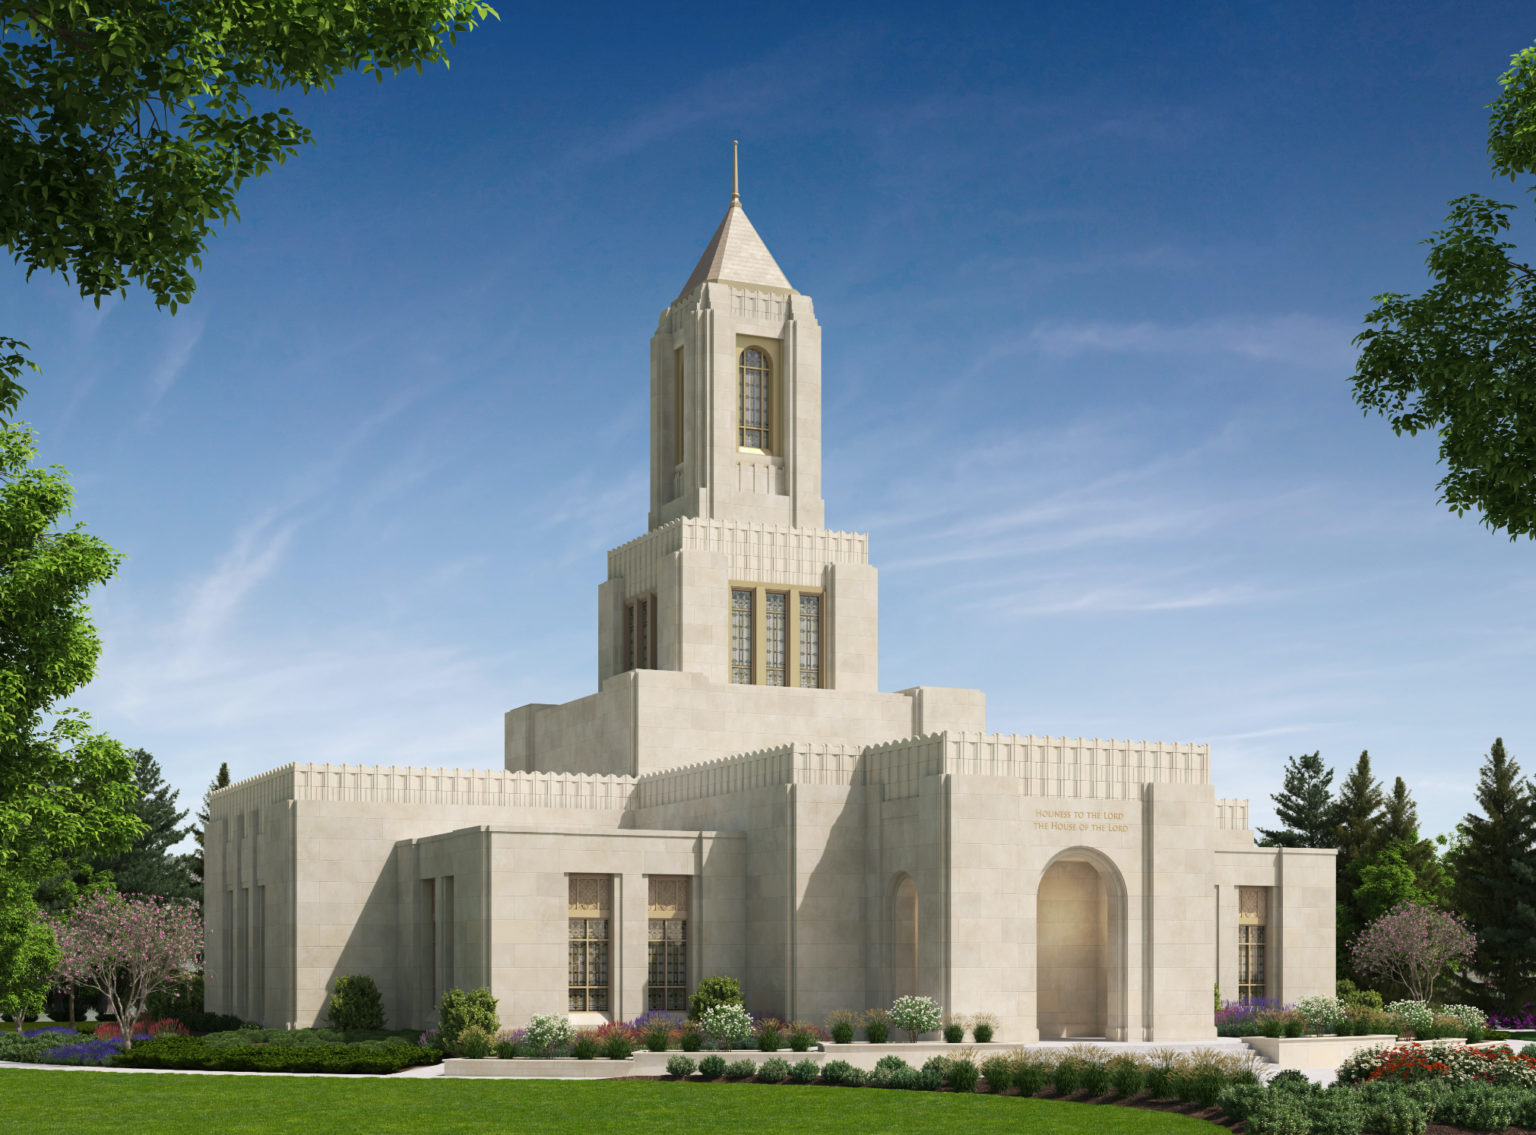 LDS announces groundbreaking date on Casper Wyoming Temple, Wyoming’s